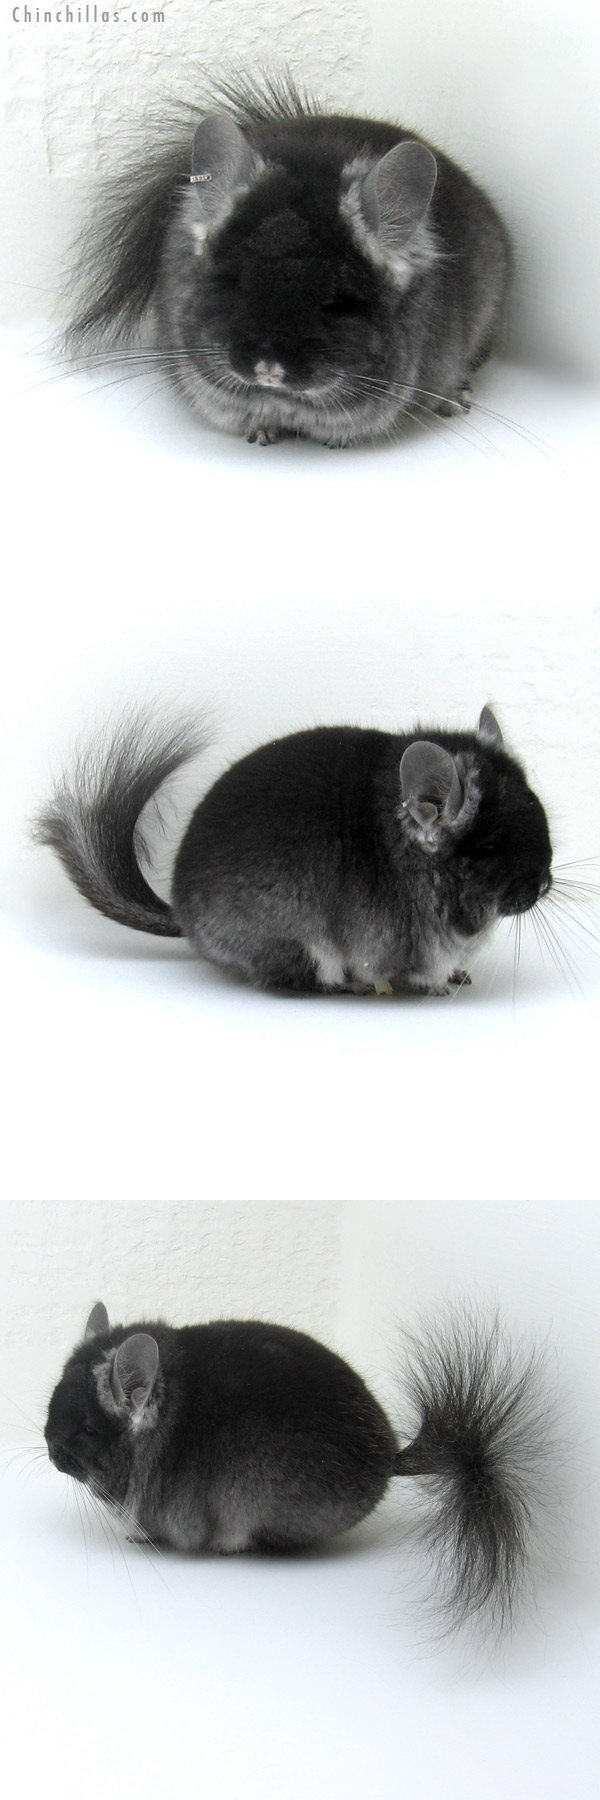 Chinchilla or related item offered for sale or export on Chinchillas.com - 12005 Exceptional Black Velvet Royal Persian Angora Male Chinchilla